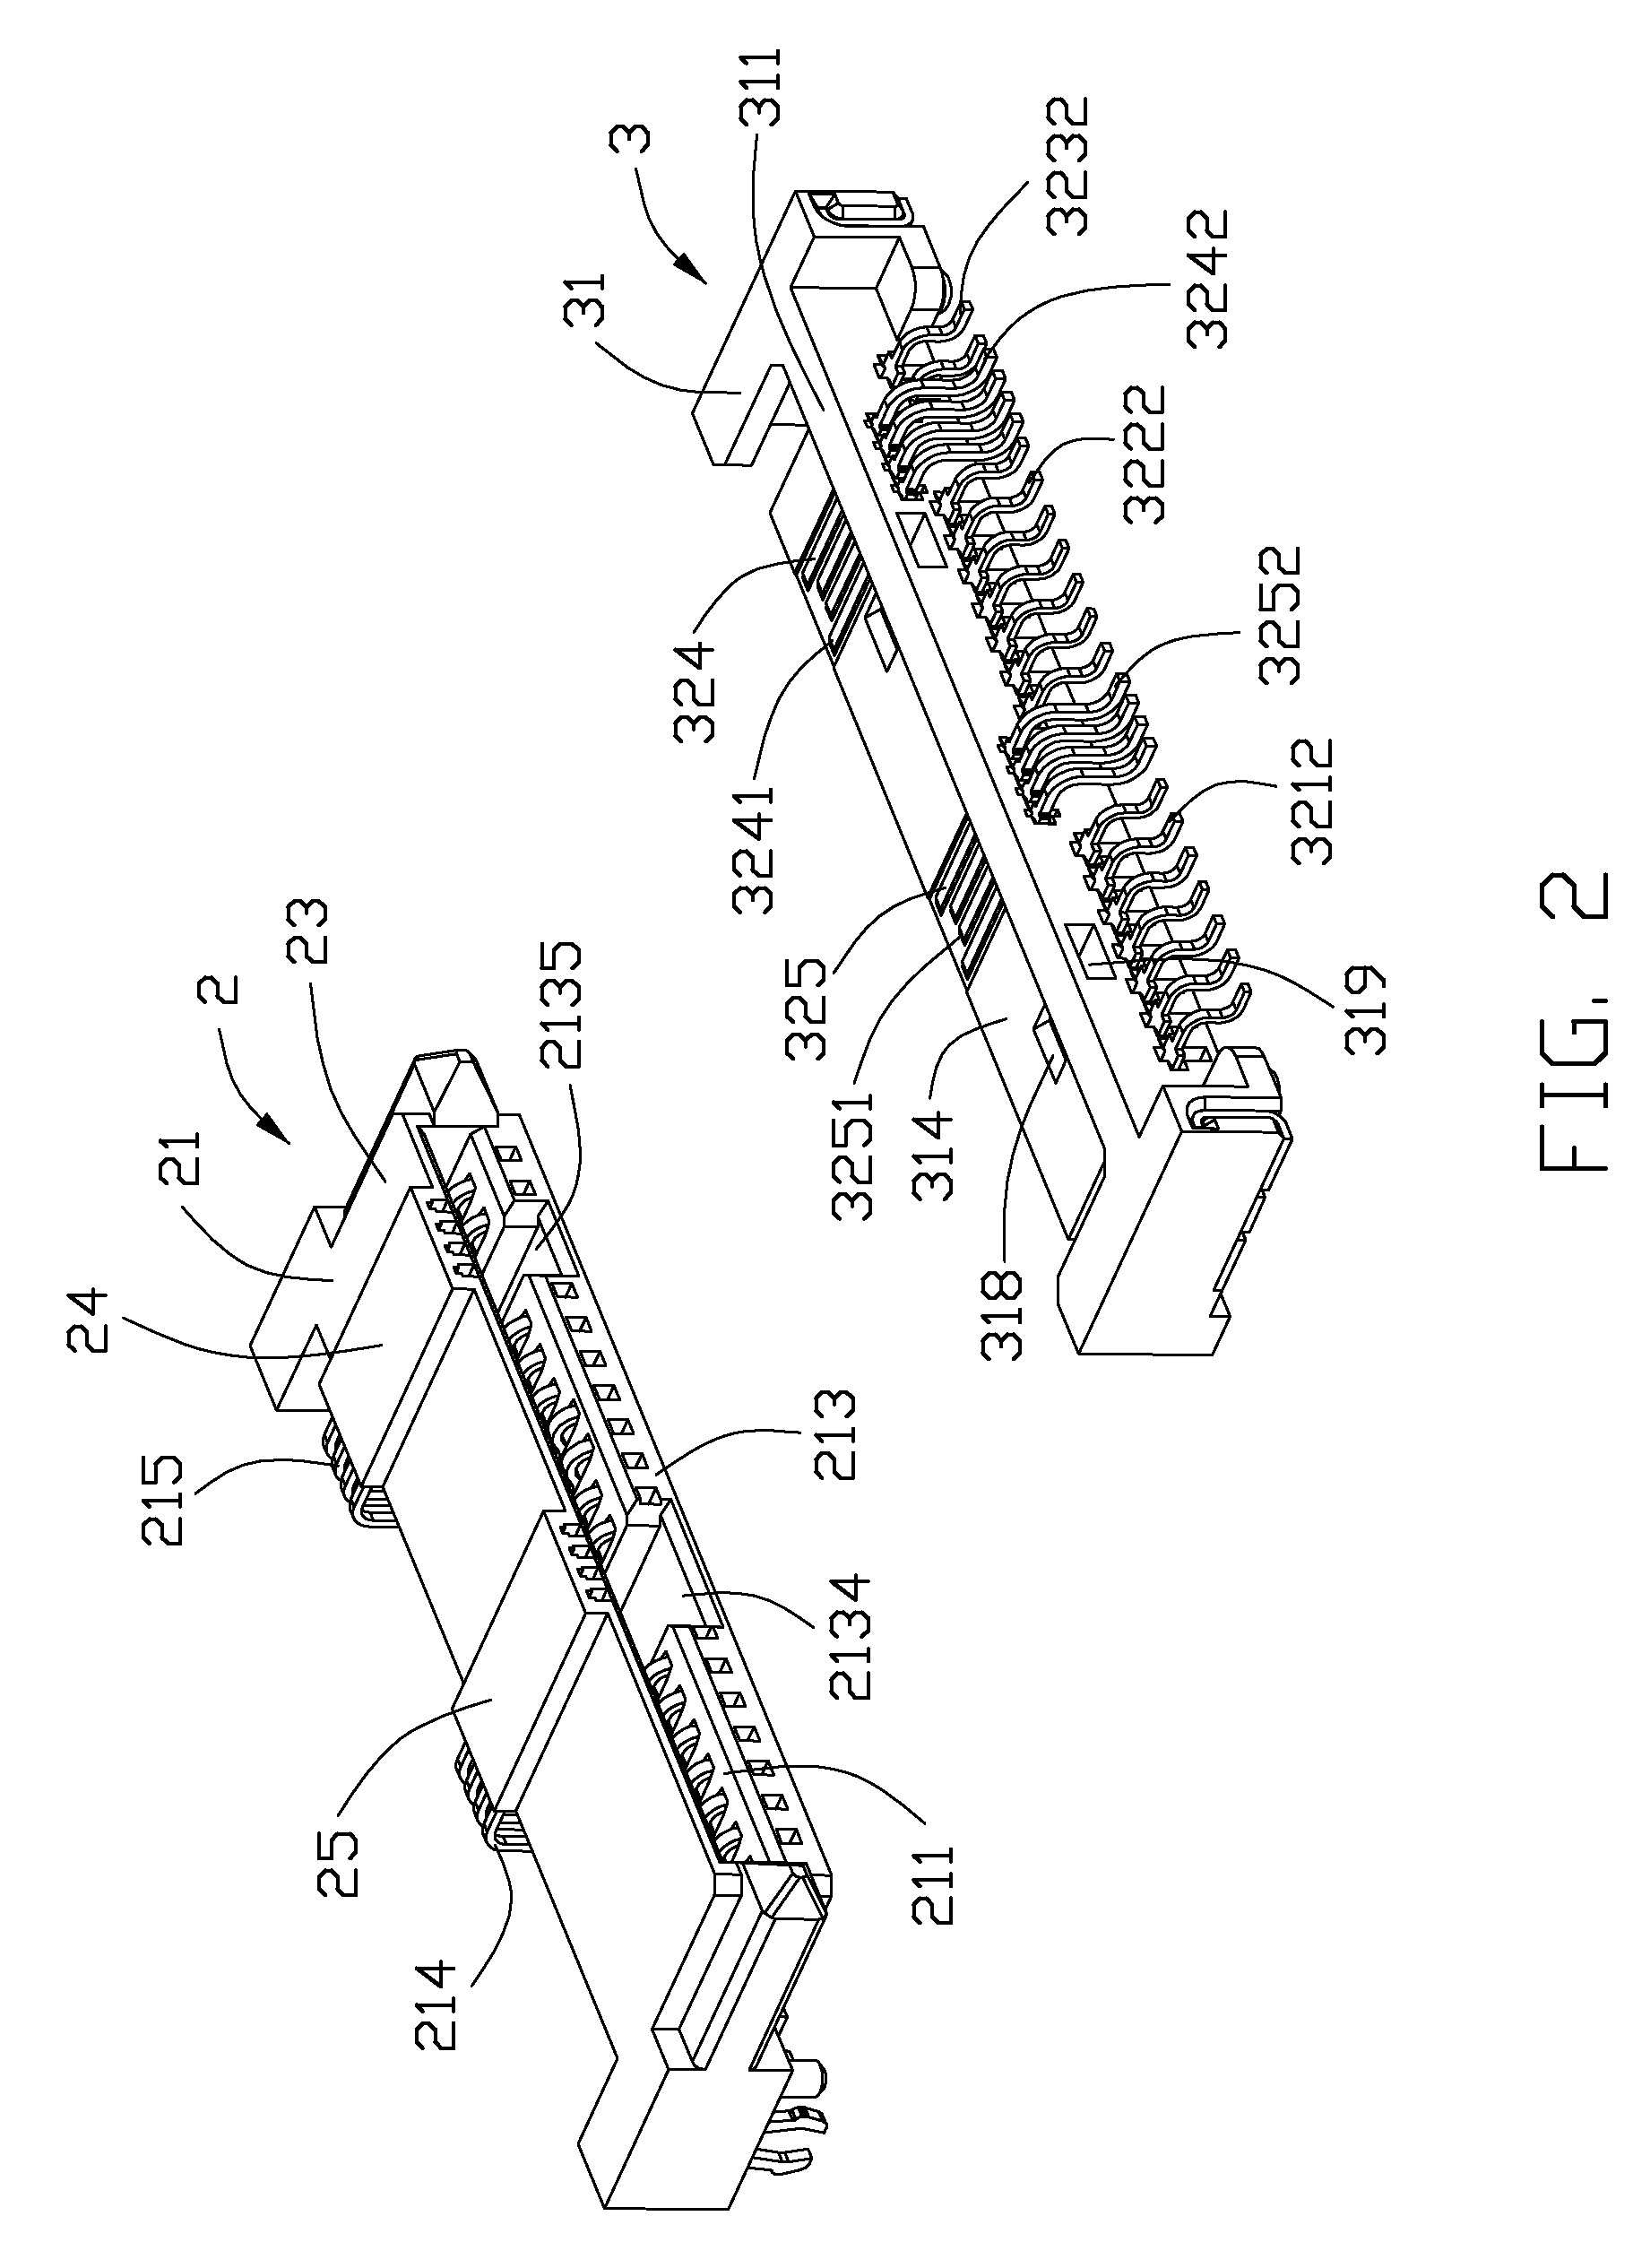 Electrical connector with two grooves dividing contacts